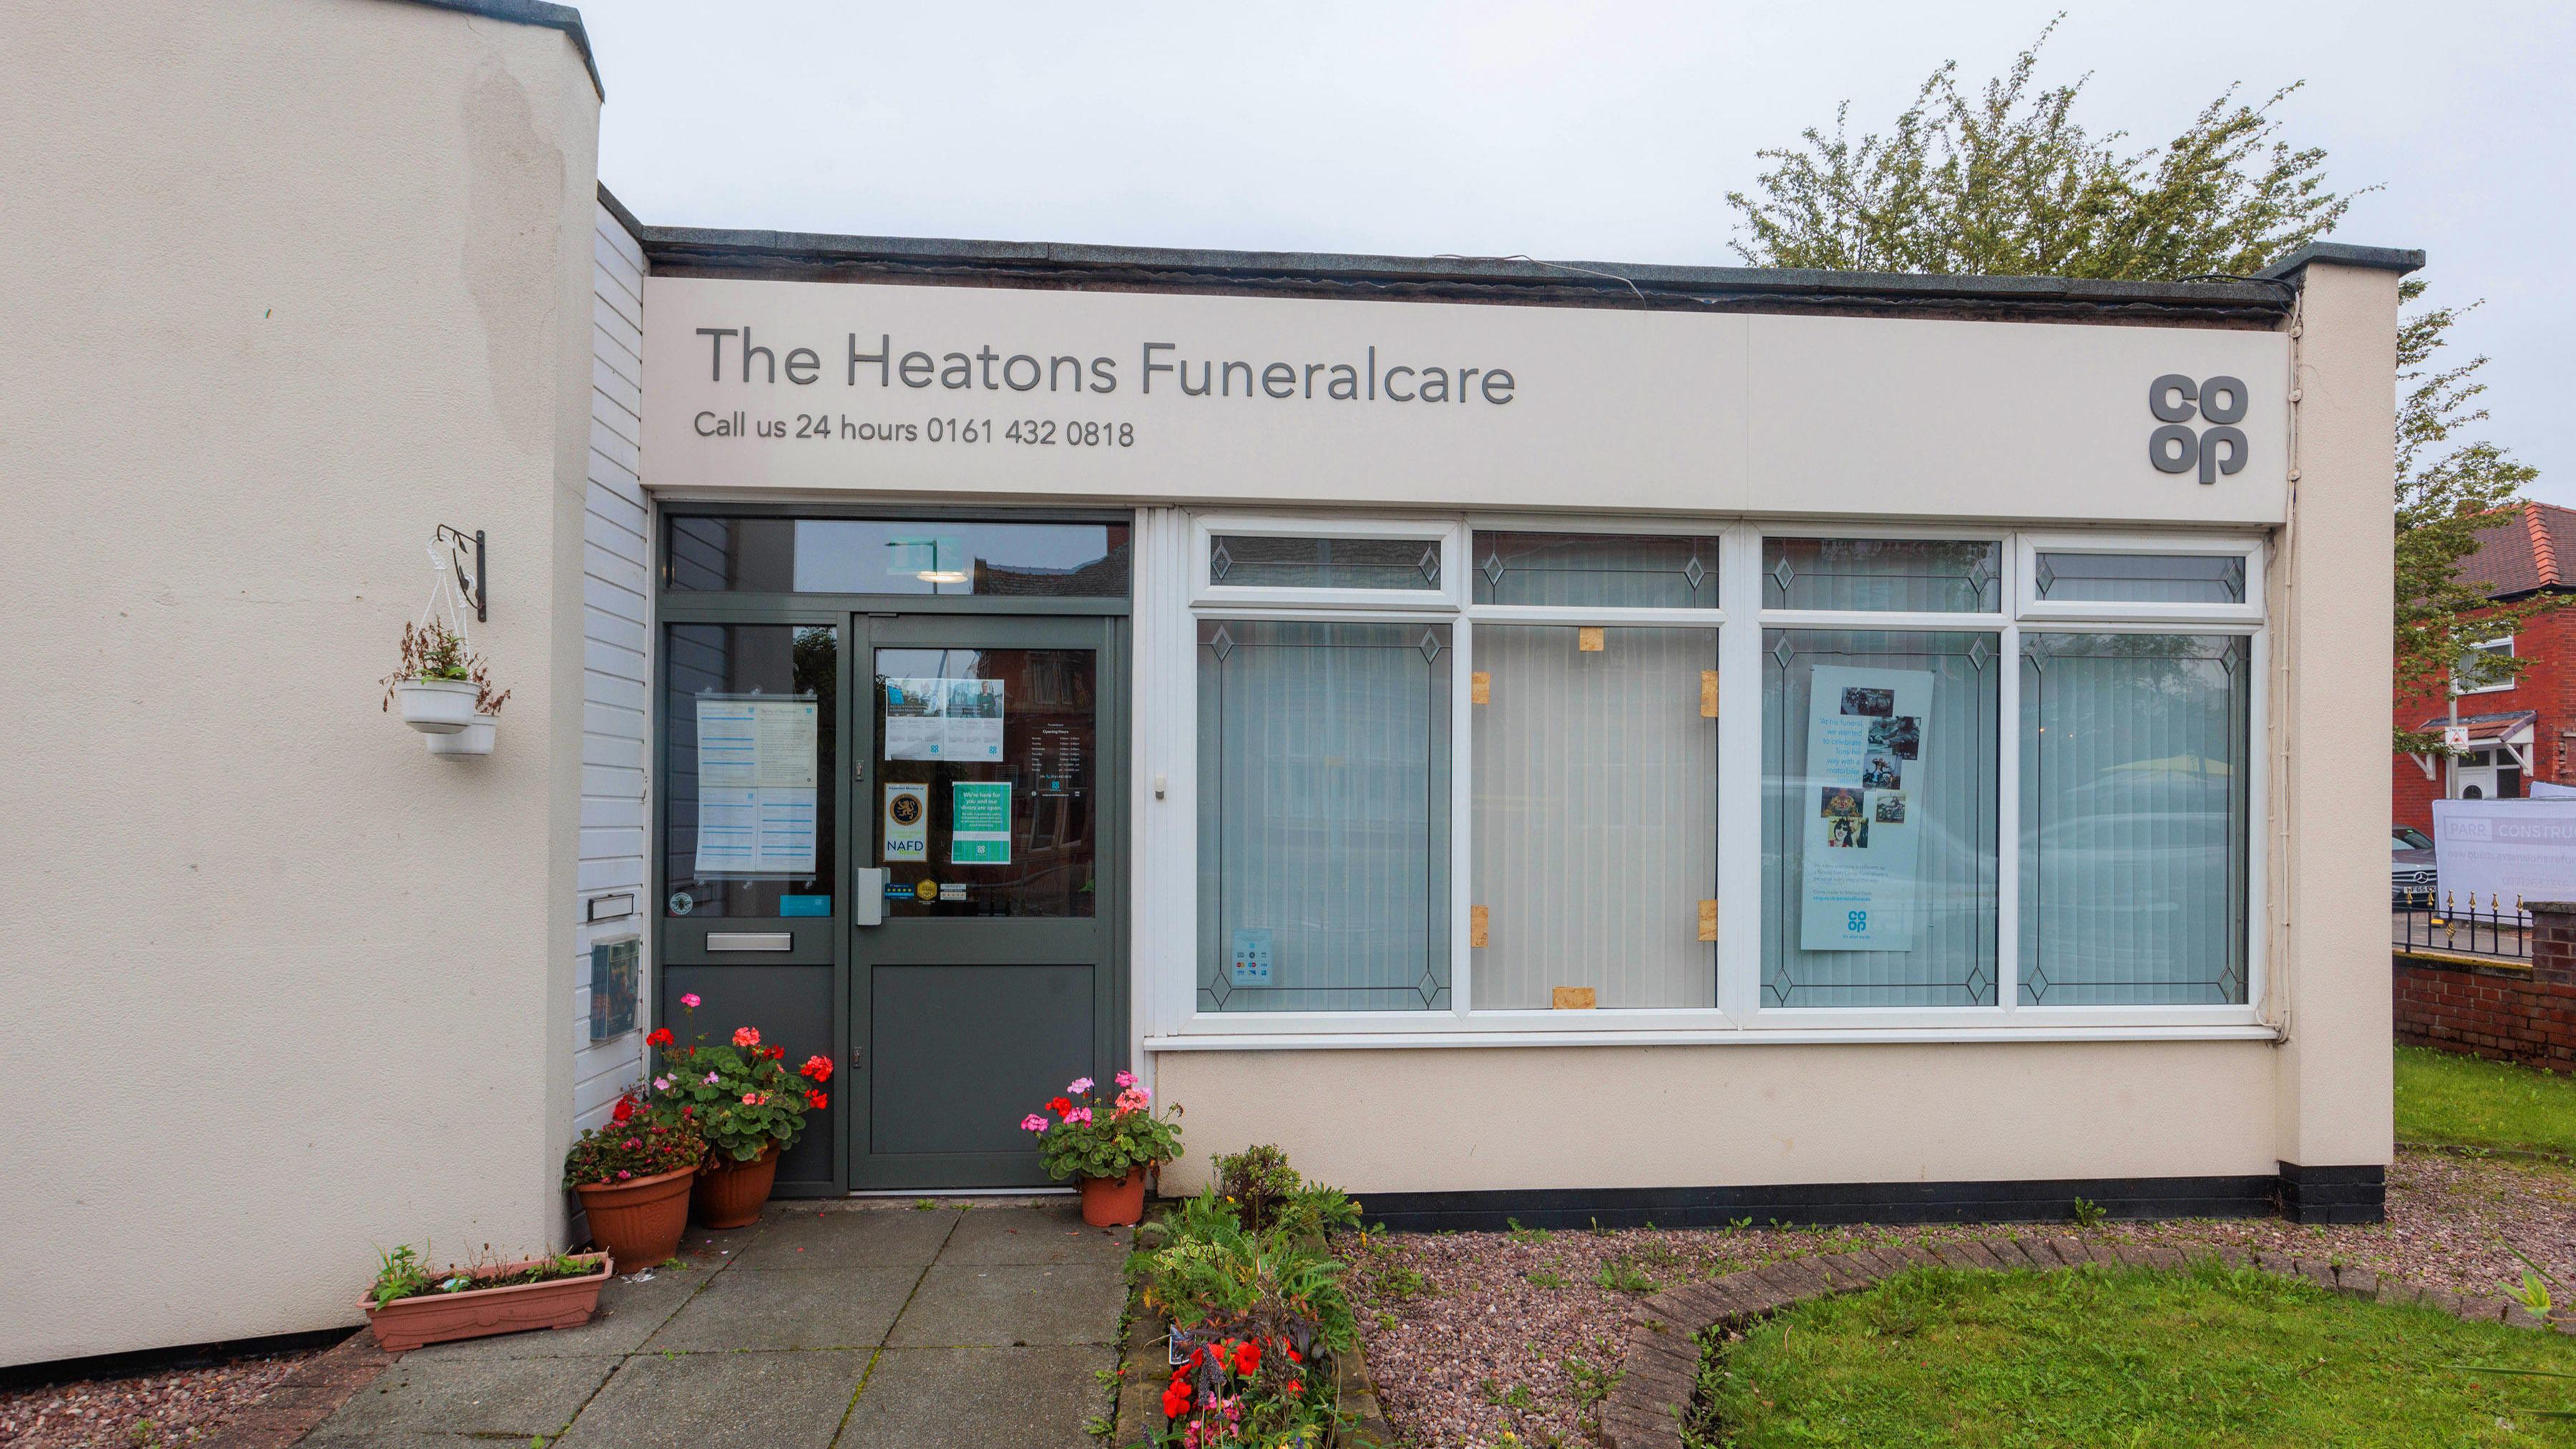 Images The Heatons Funeralcare